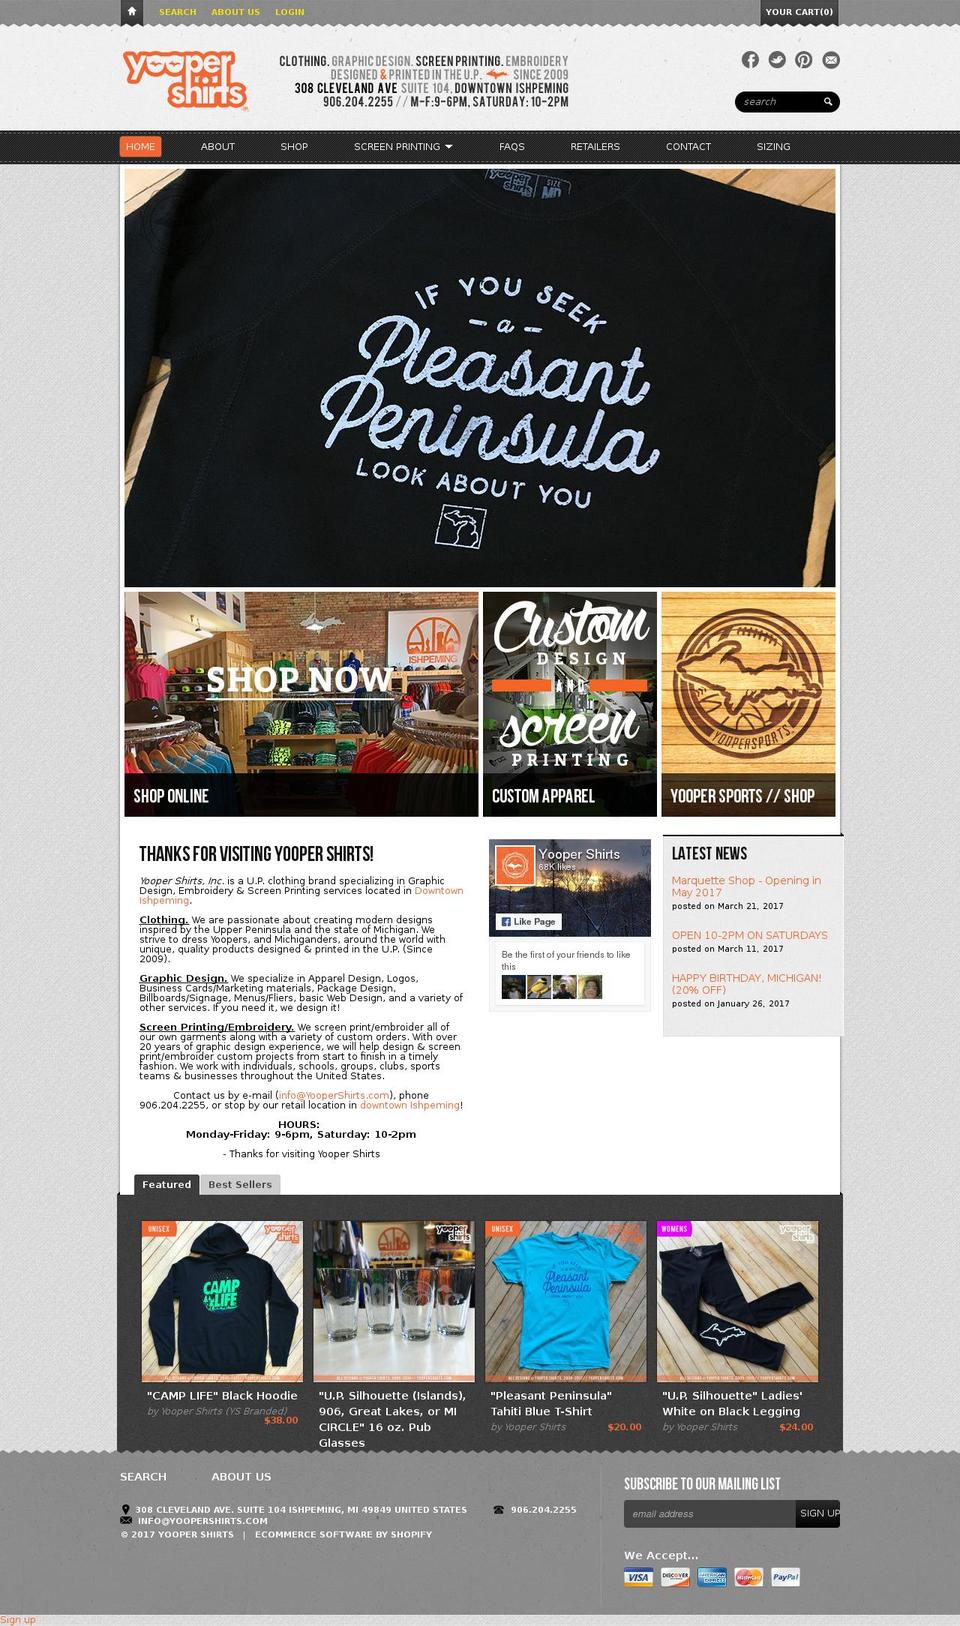 Reign Shopify theme site example sisushirts.com